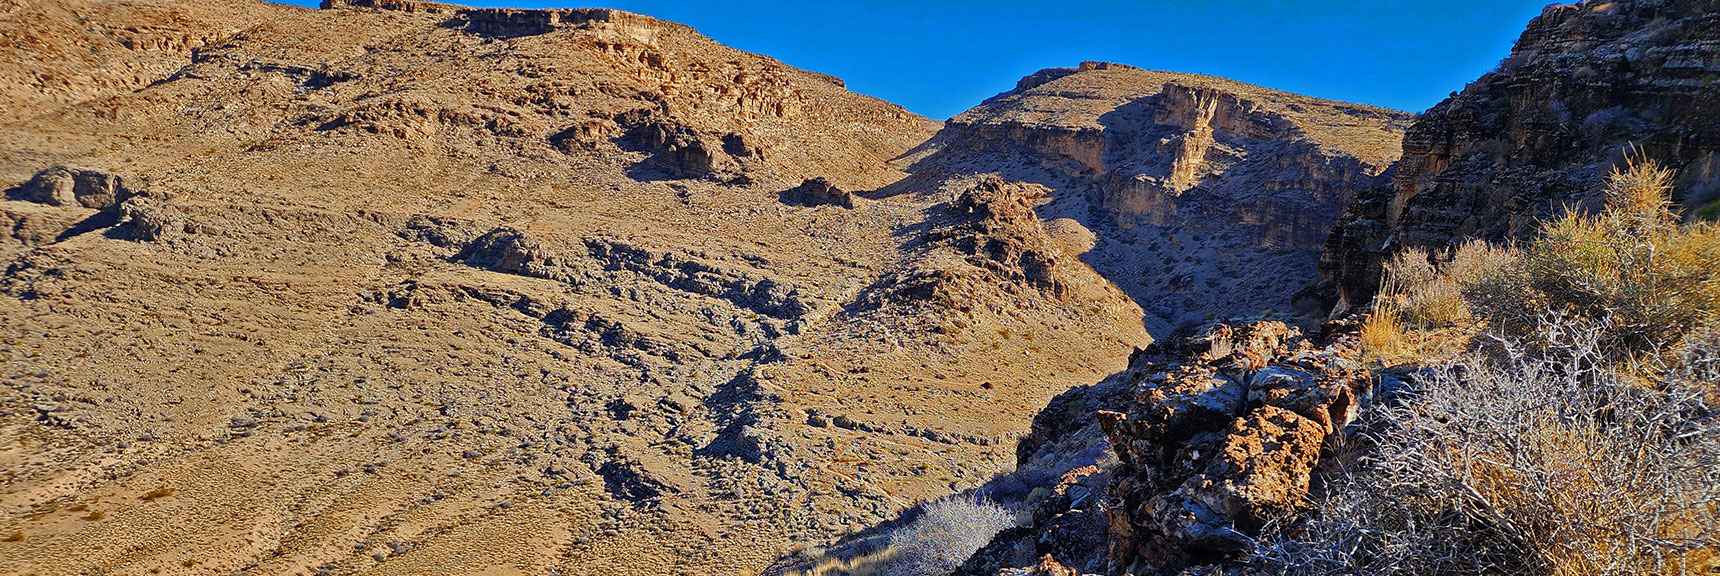 View Up Skull Canyon from Near Base of Bone Shaker Trail | Eastern Outer Circuit | Blue Diamond Hill | Red Rock Canyon, Nevada